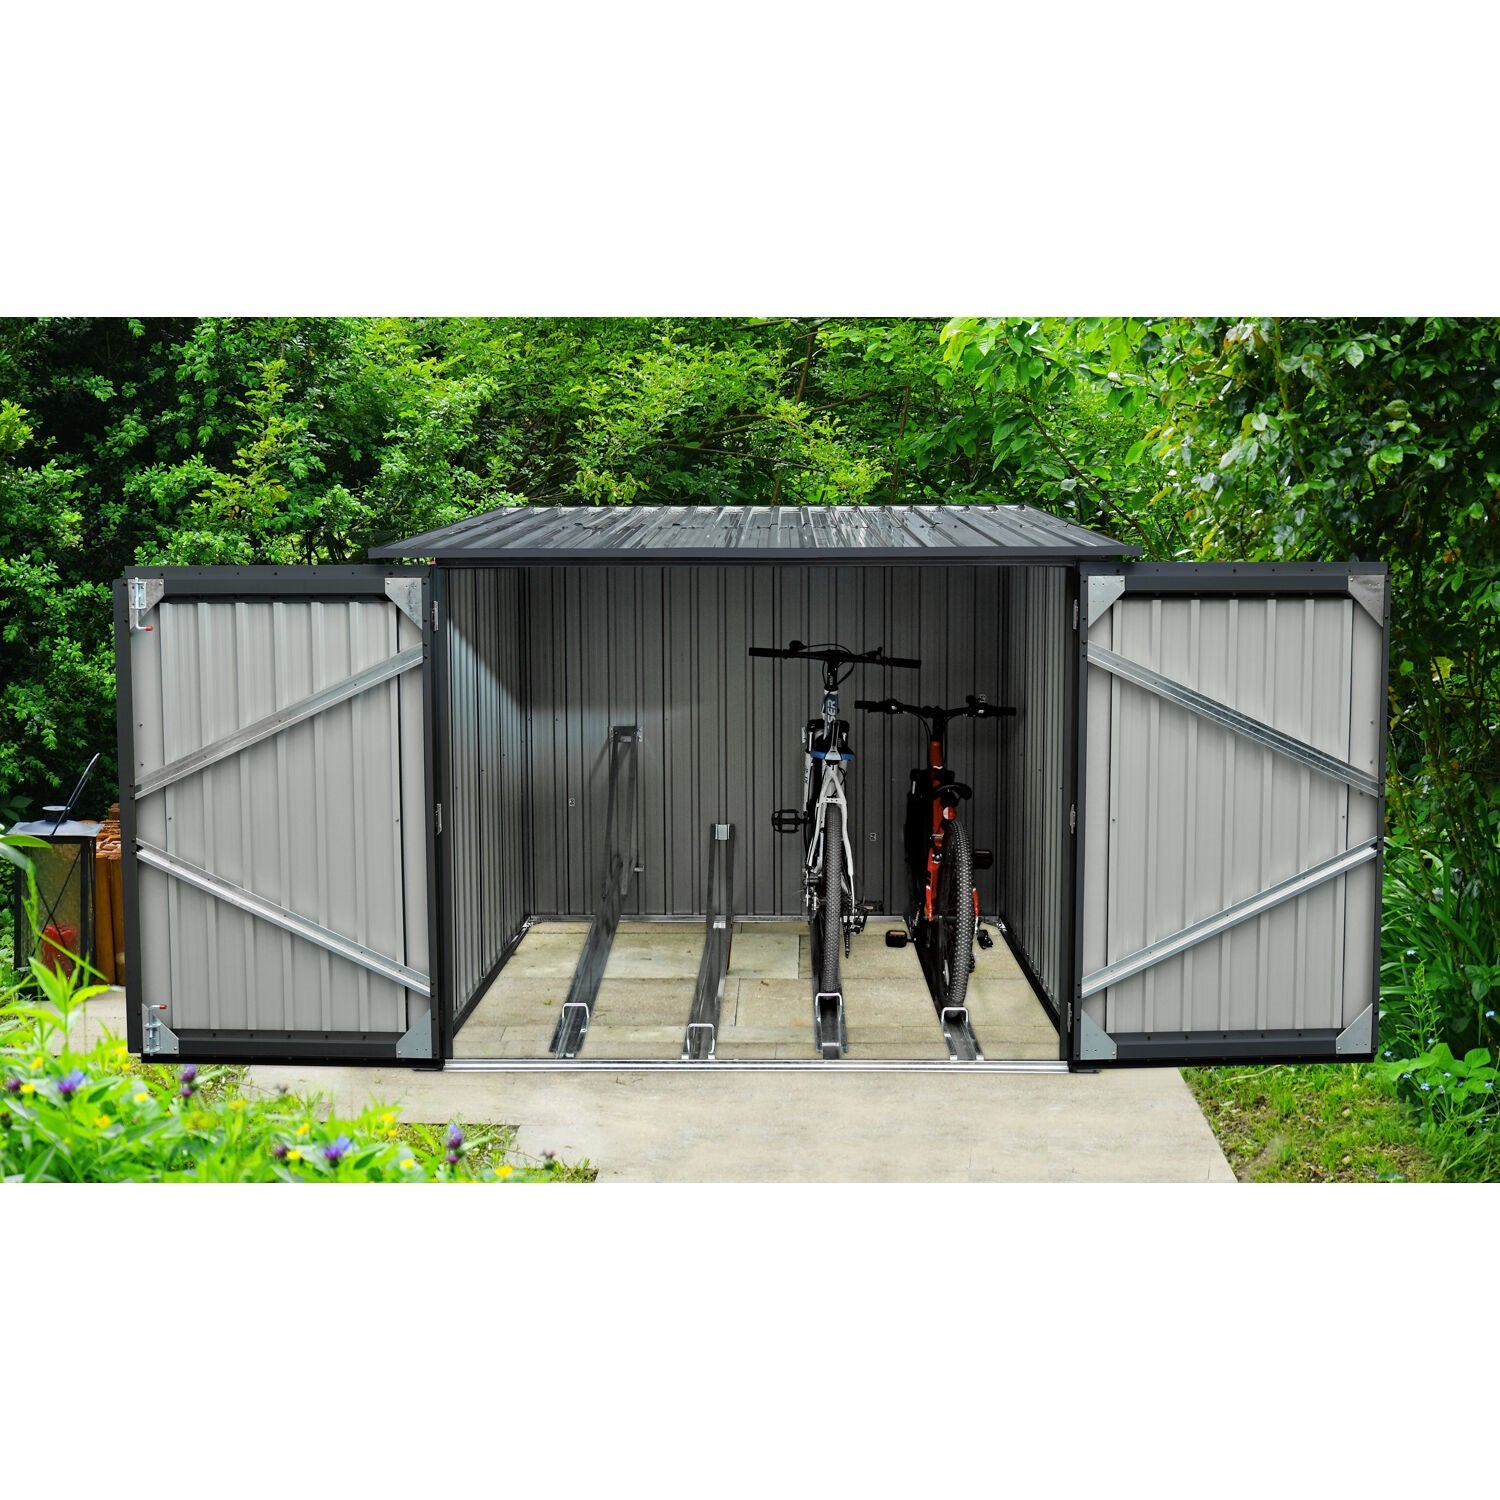 Hanover Galvanized Steel Bicycle Storage Shed with Twist Lock and Key for up to 4 Bikes, Dark Gray